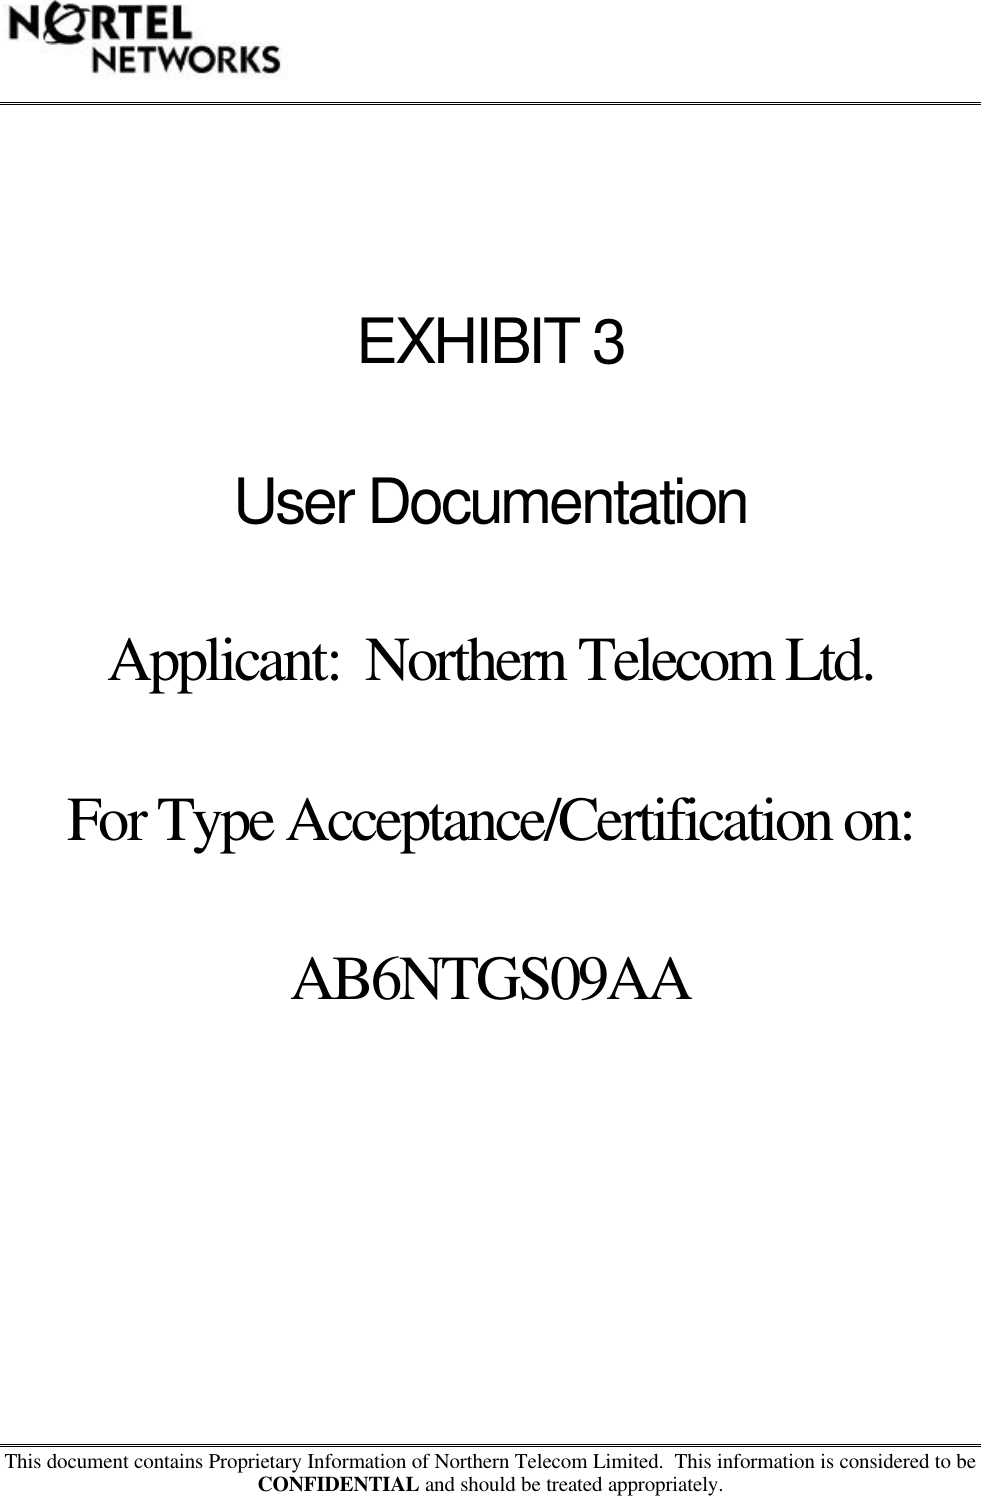 This document contains Proprietary Information of Northern Telecom Limited.  This information is considered to beCONFIDENTIAL and should be treated appropriately.EXHIBIT 3User DocumentationApplicant:  Northern Telecom Ltd.For Type Acceptance/Certification on:AB6NTGS09AA